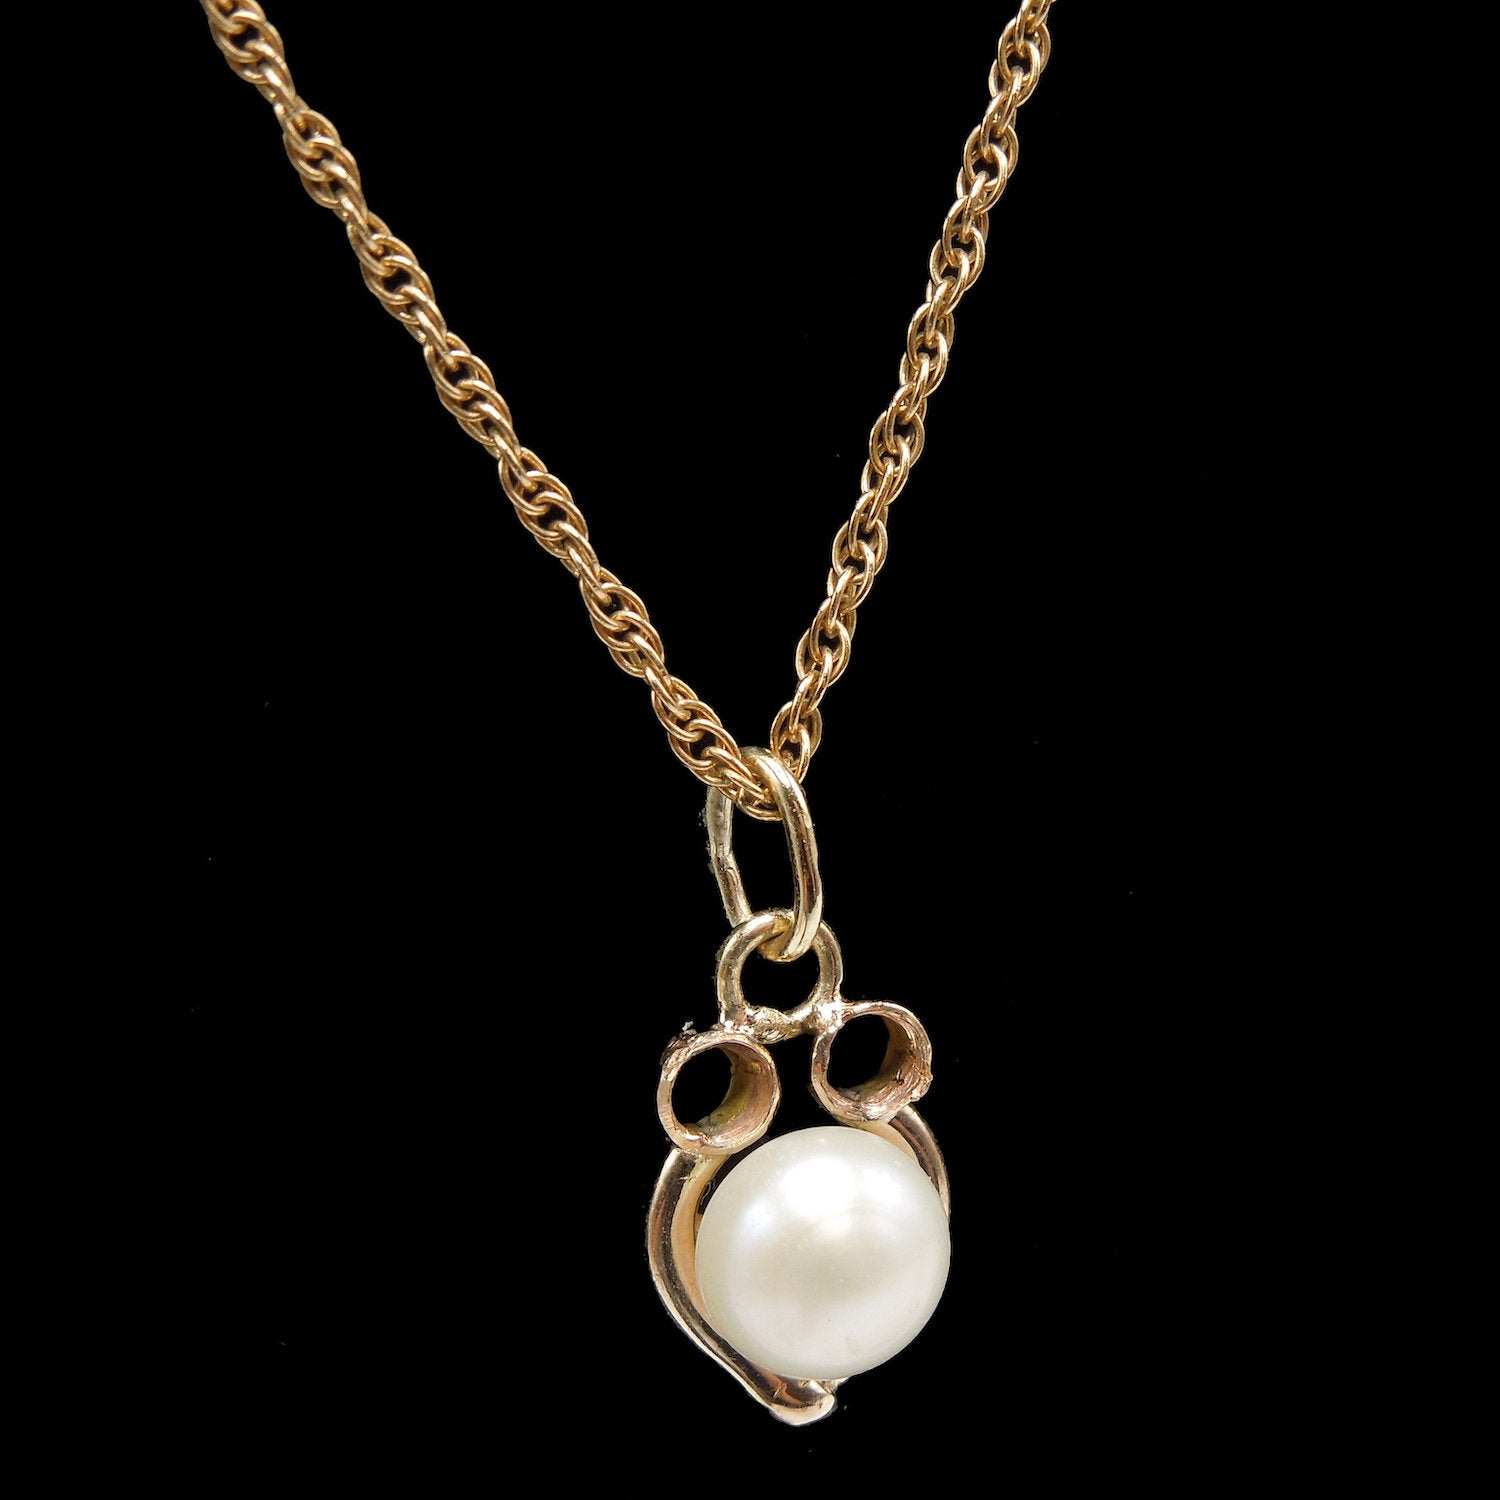 Antique Gold and Pearl Pendant on 18" Gold Rope Chain